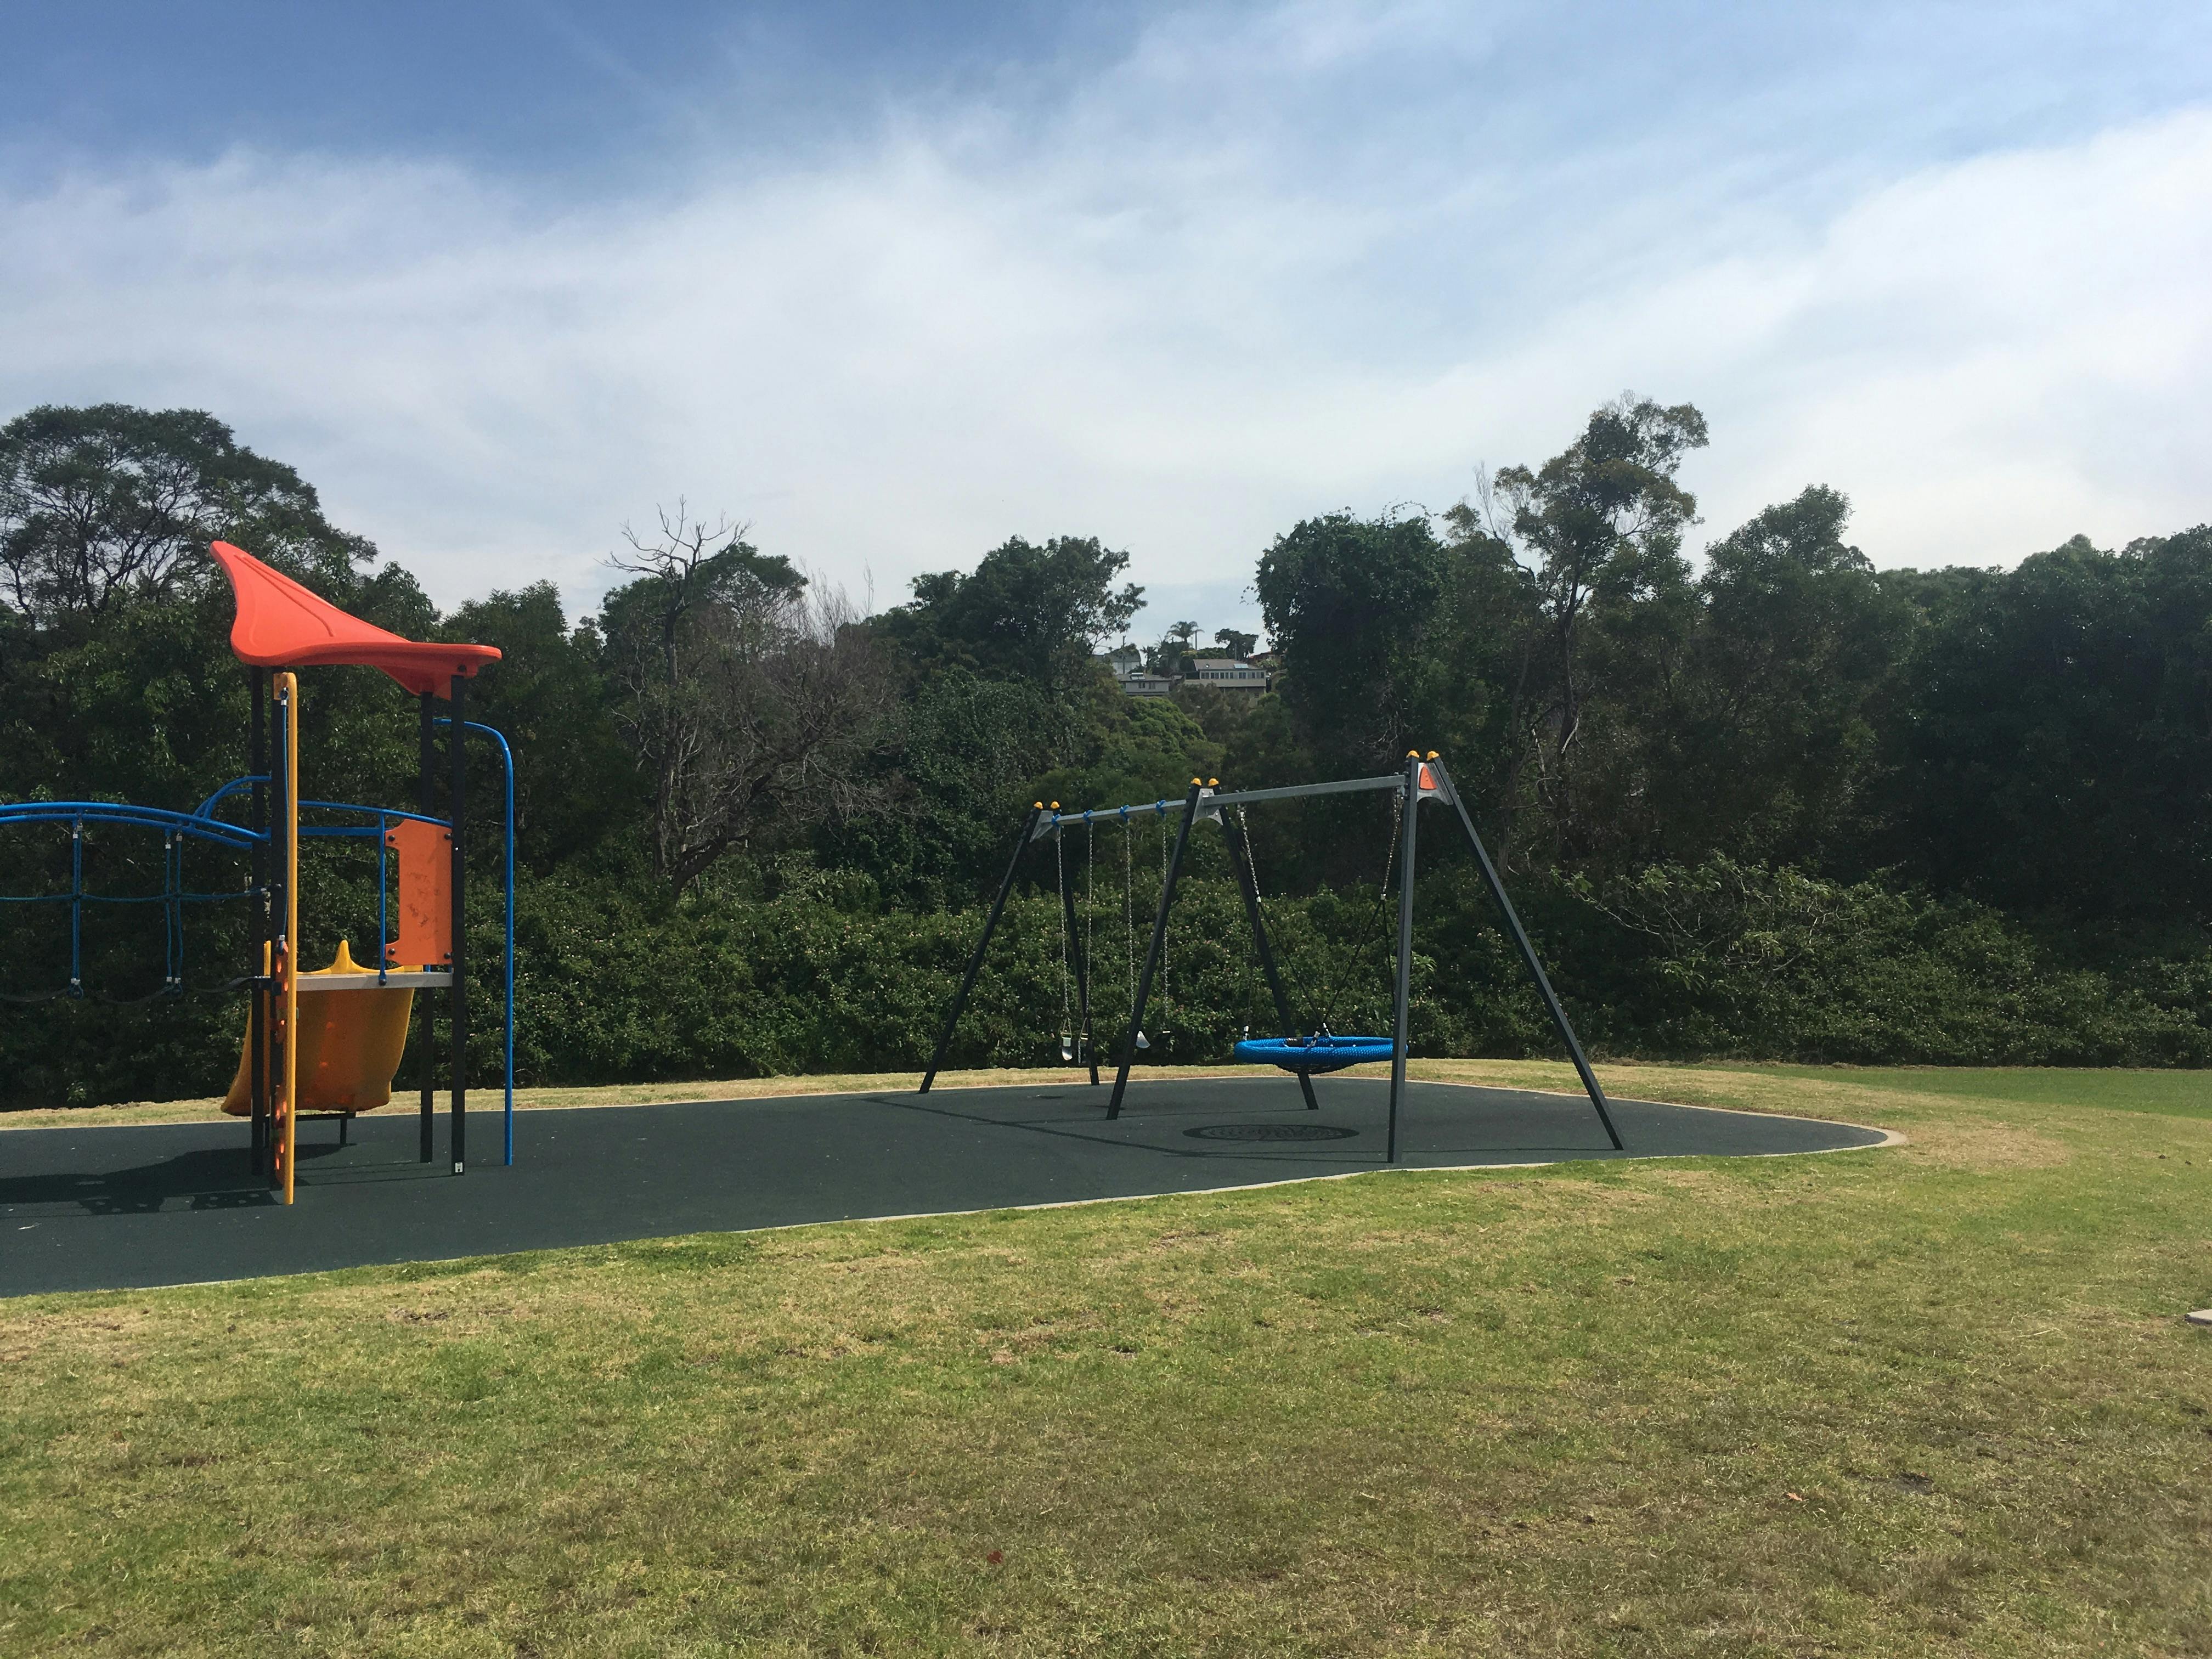 Existing play equipment in reserve